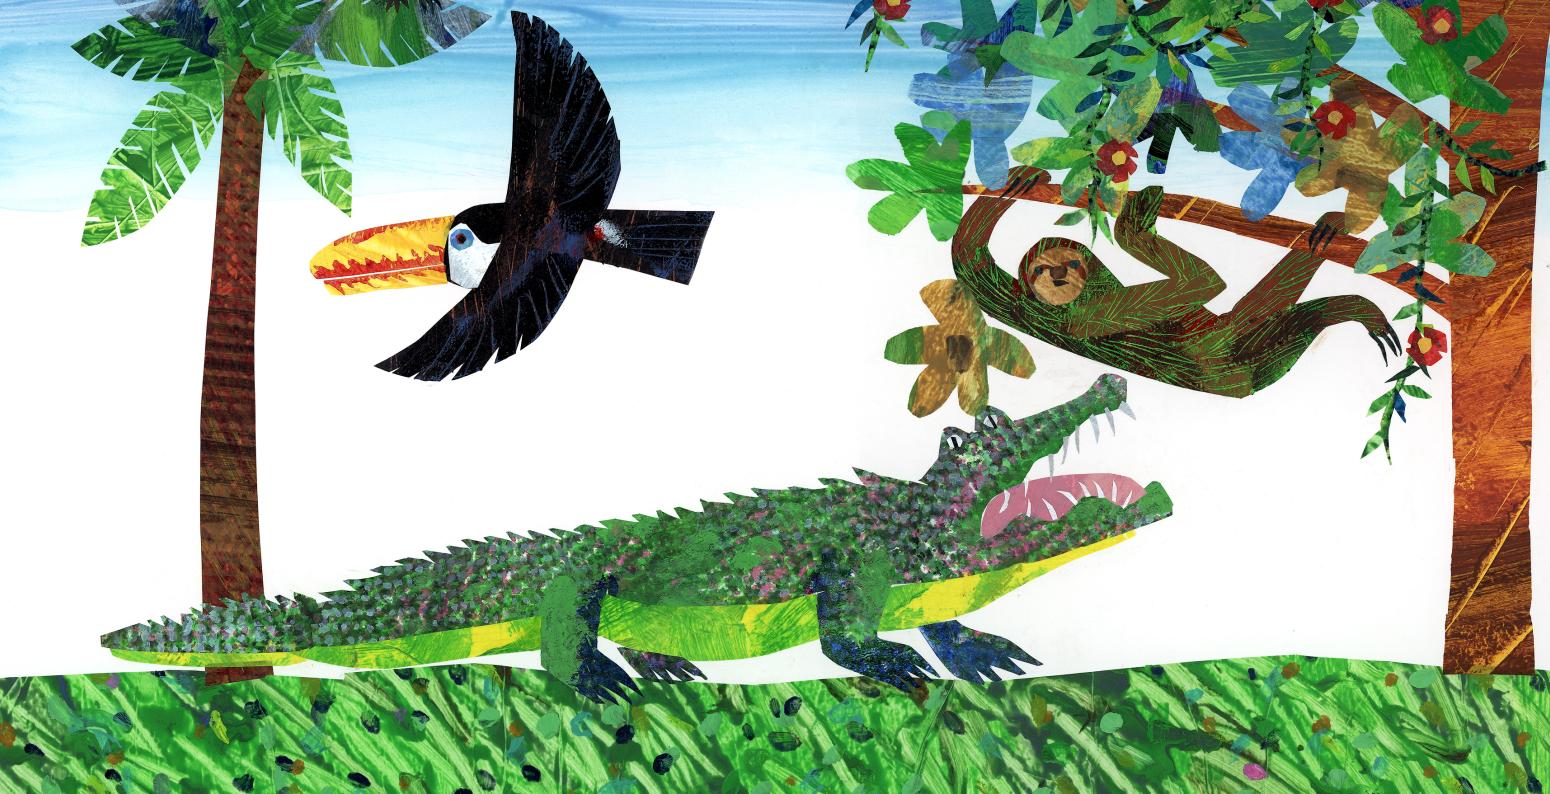 Illustration of sloth in tree with orange-billed birds and crocodile.